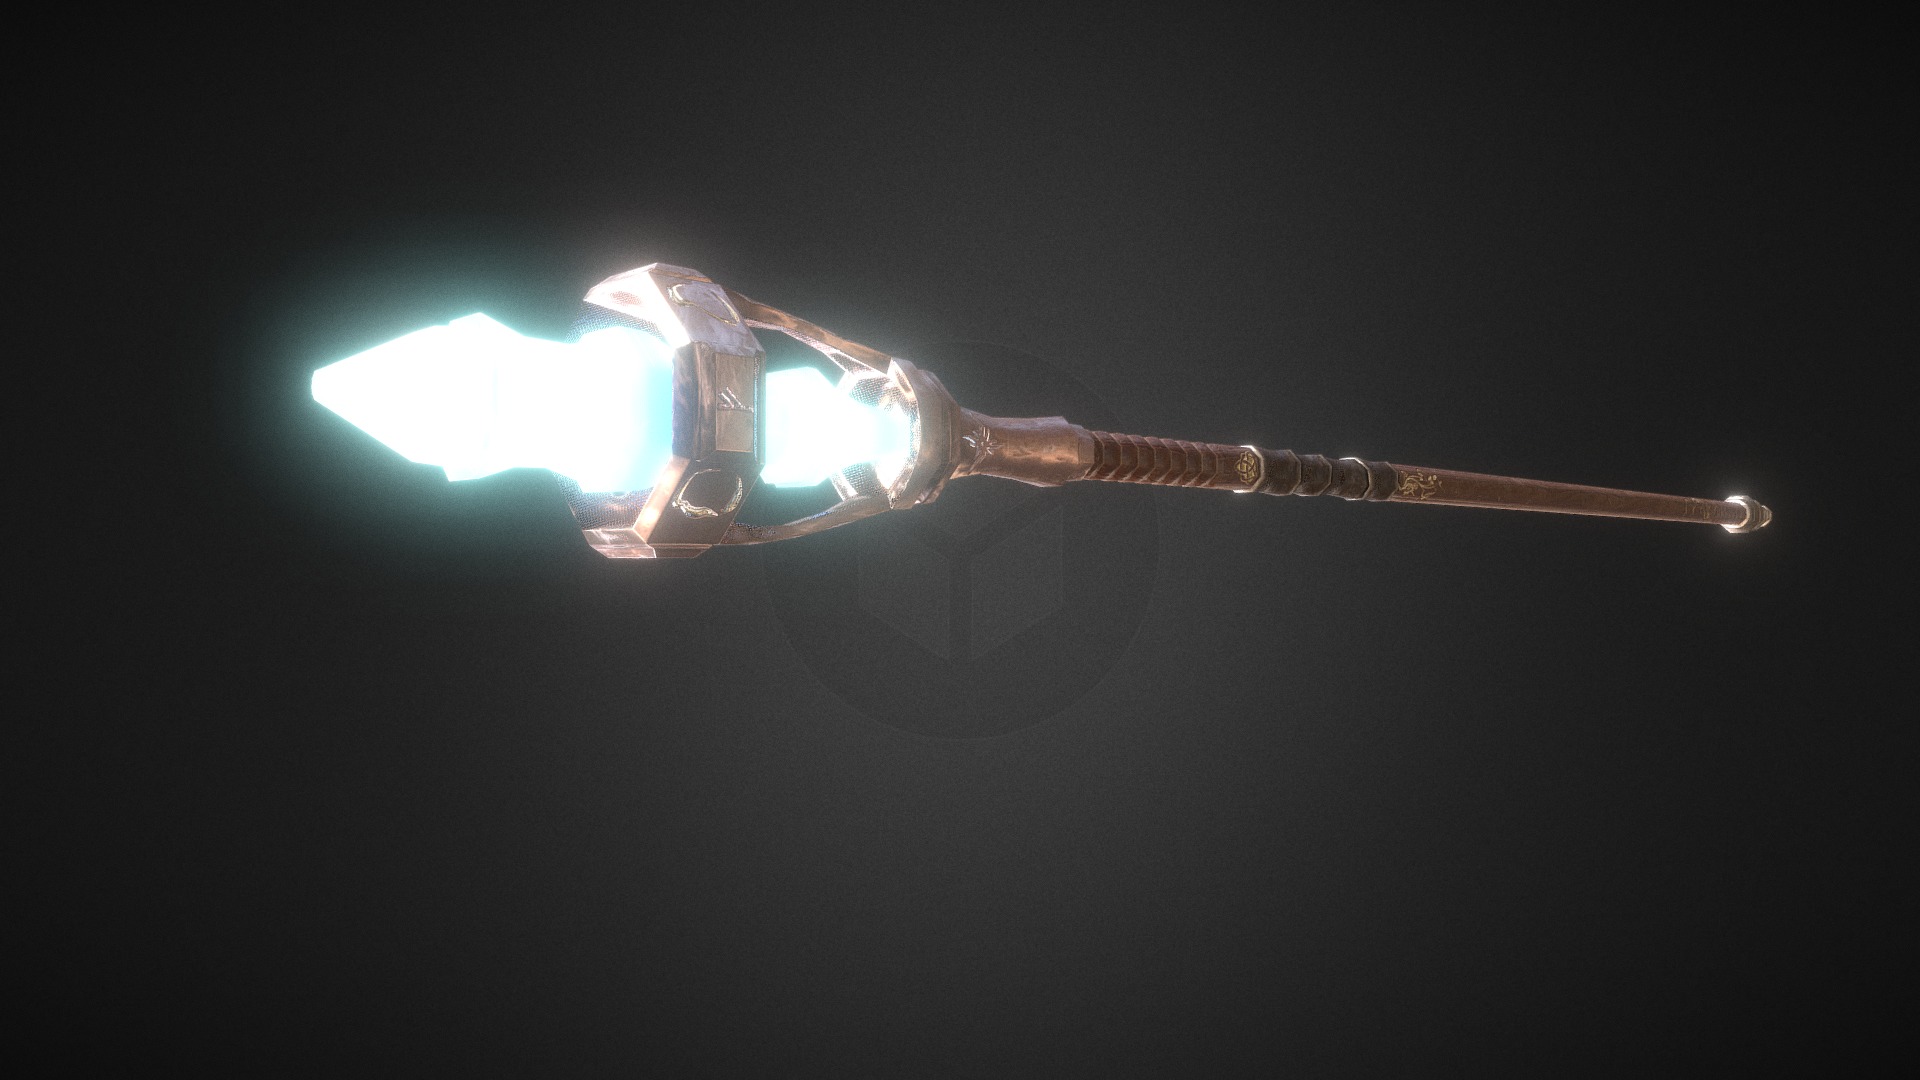 One of first staffs I was making for my personal project 3d model